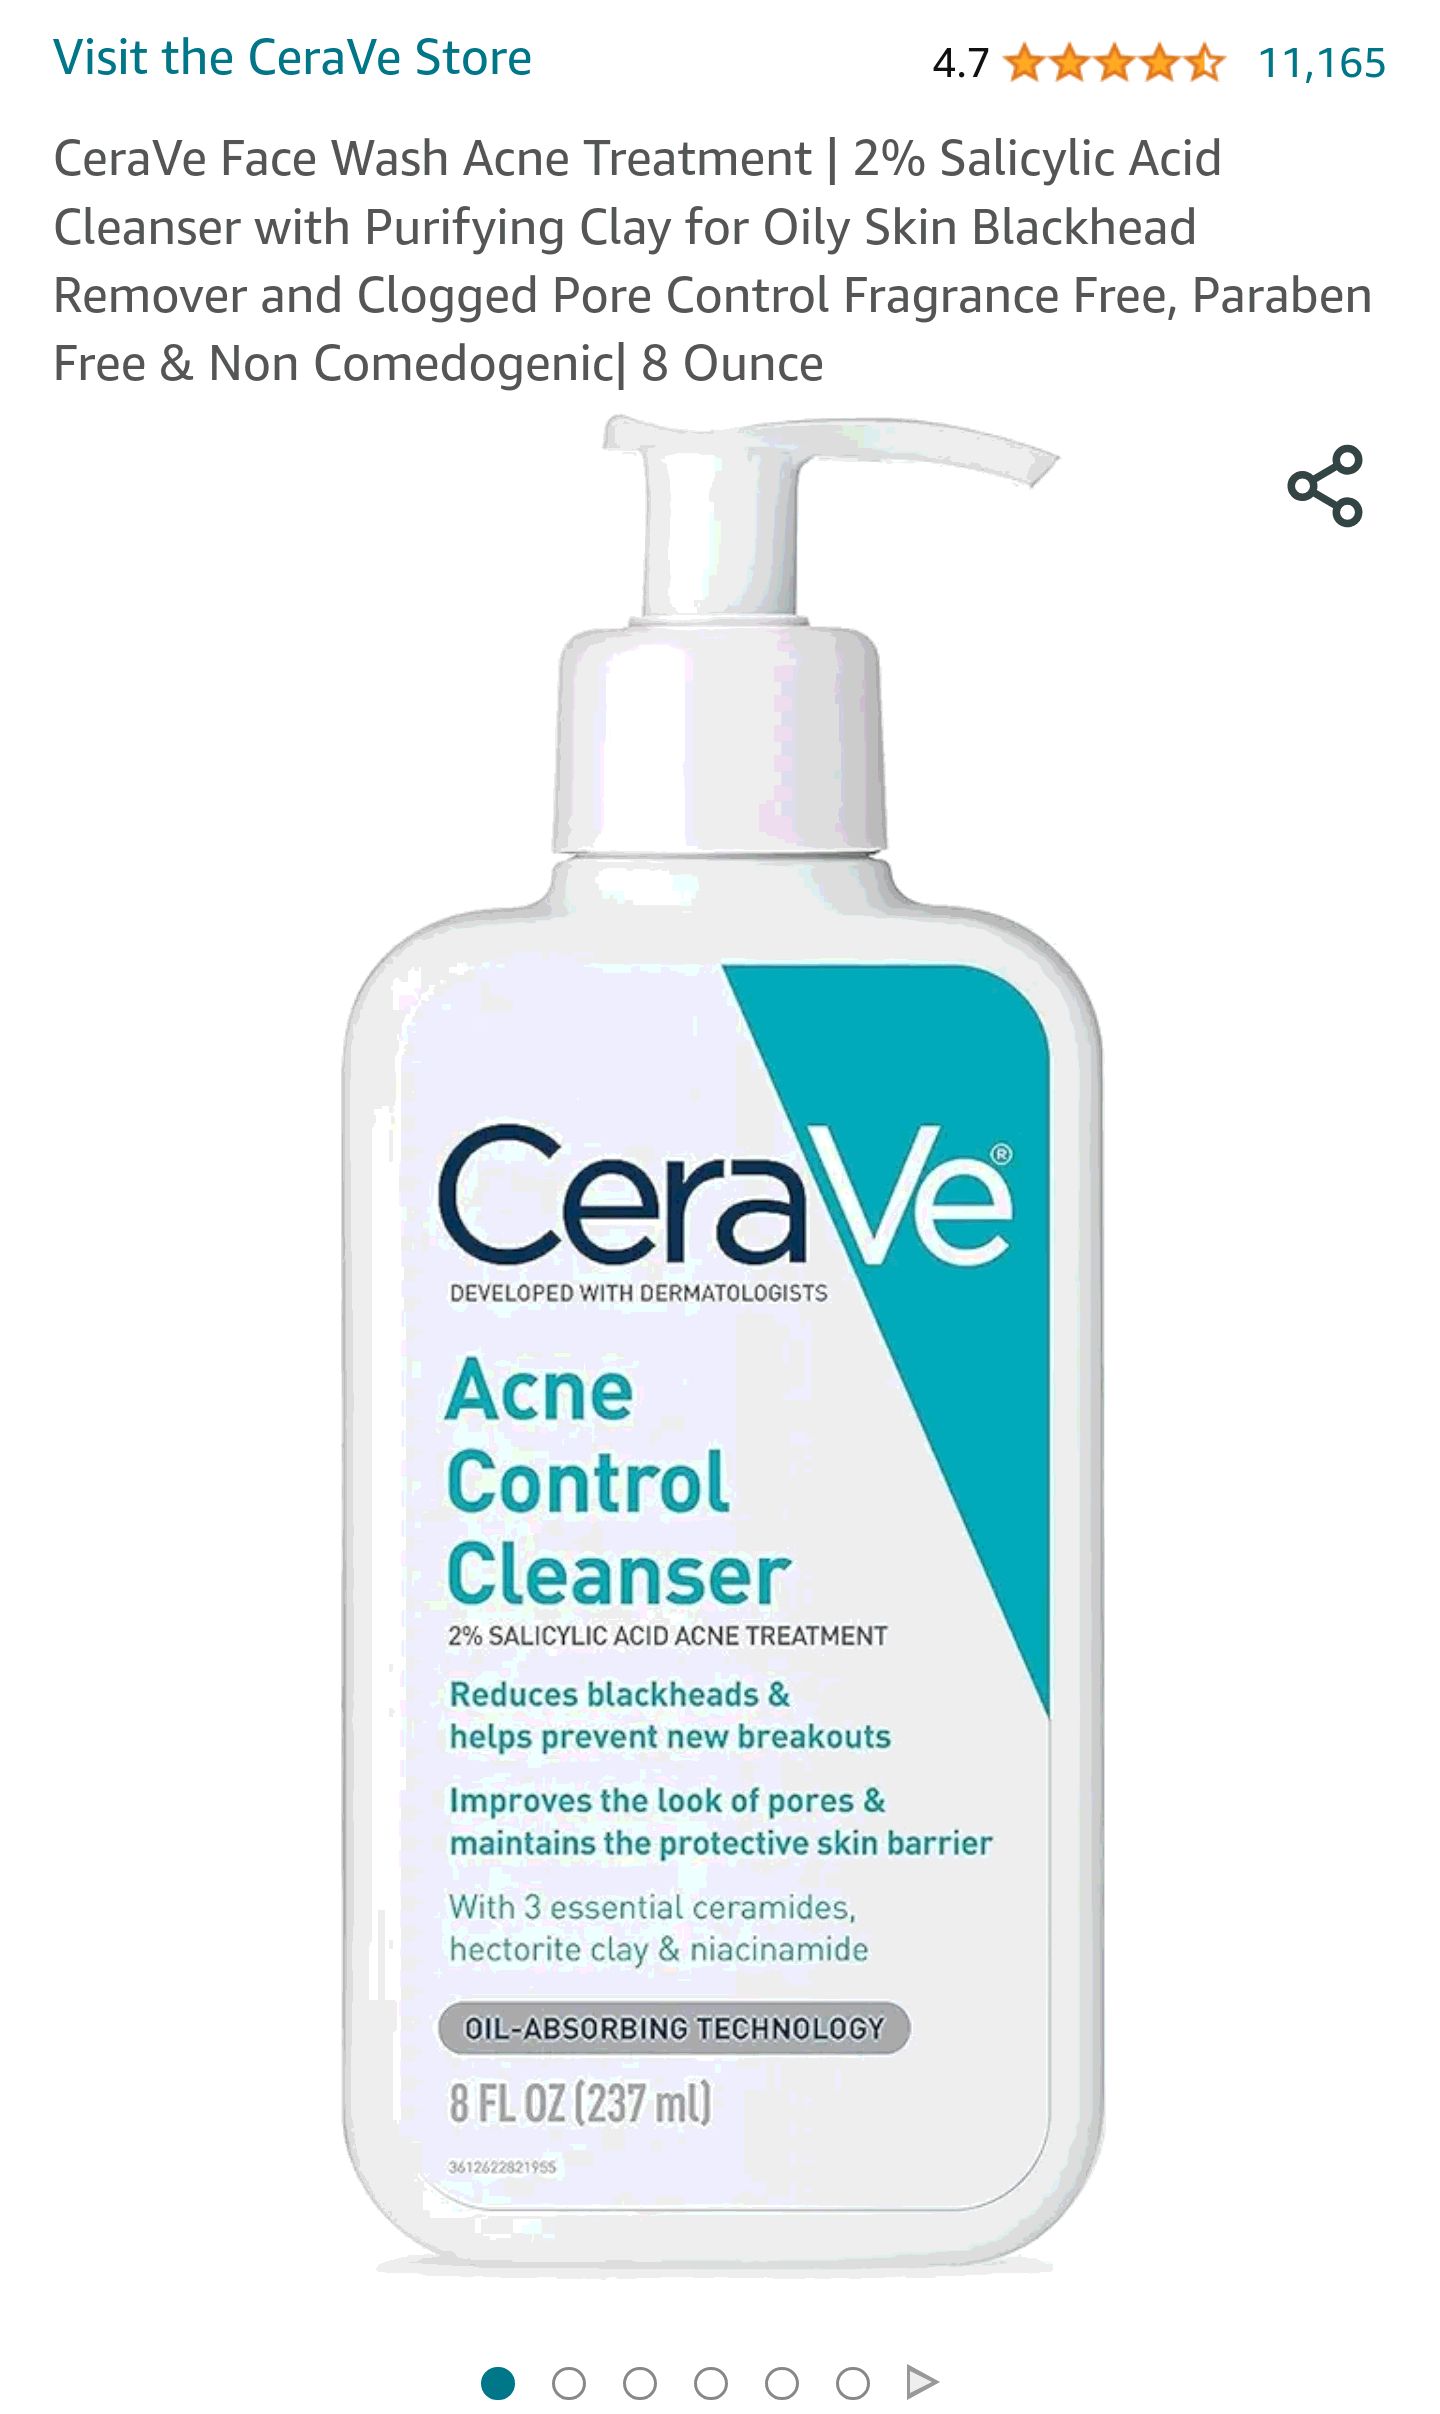 CeraVe Face Wash Acne Treatment | 2% Salicylic Acid Cleanser with Purifying Clay for Oily Skin Blackhead Remover and Clogged Pore Control Fragrance Free, Paraben Free & Non Comedogenic| 8 Ounce : Beau